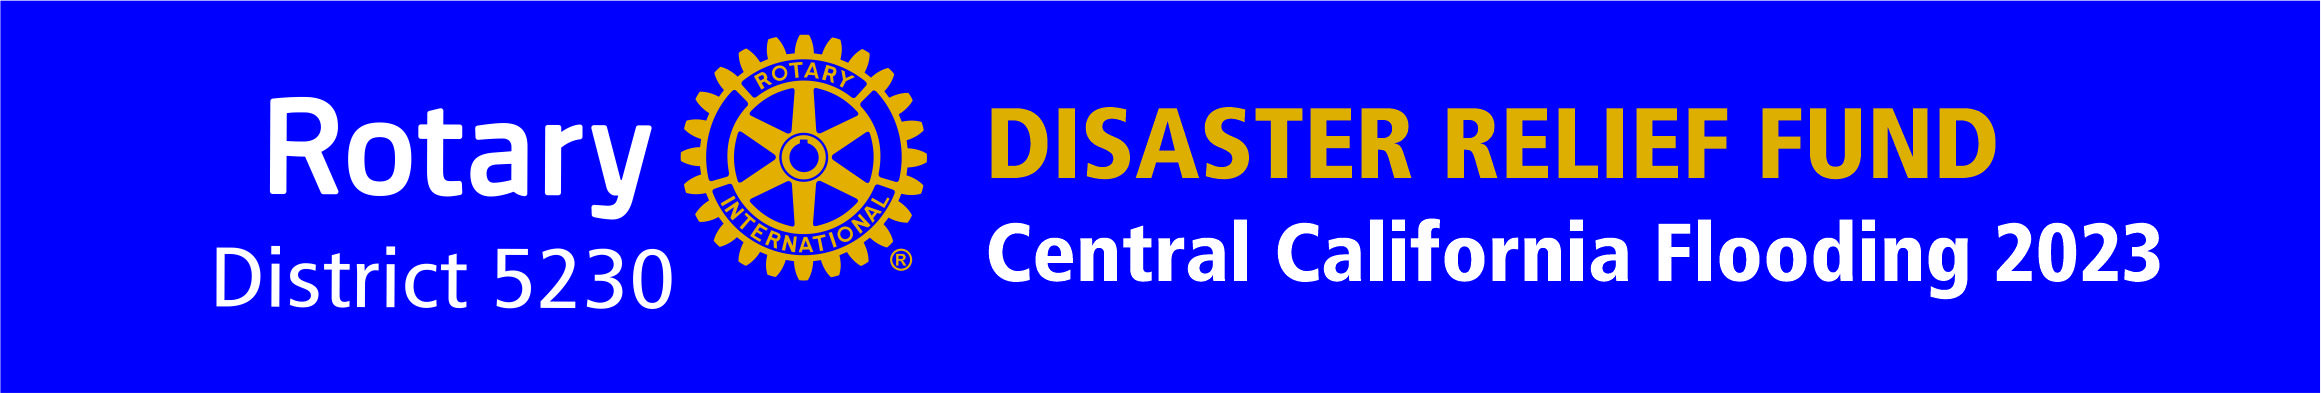 Rotary District 5230 Disaster Relief Fund Banner